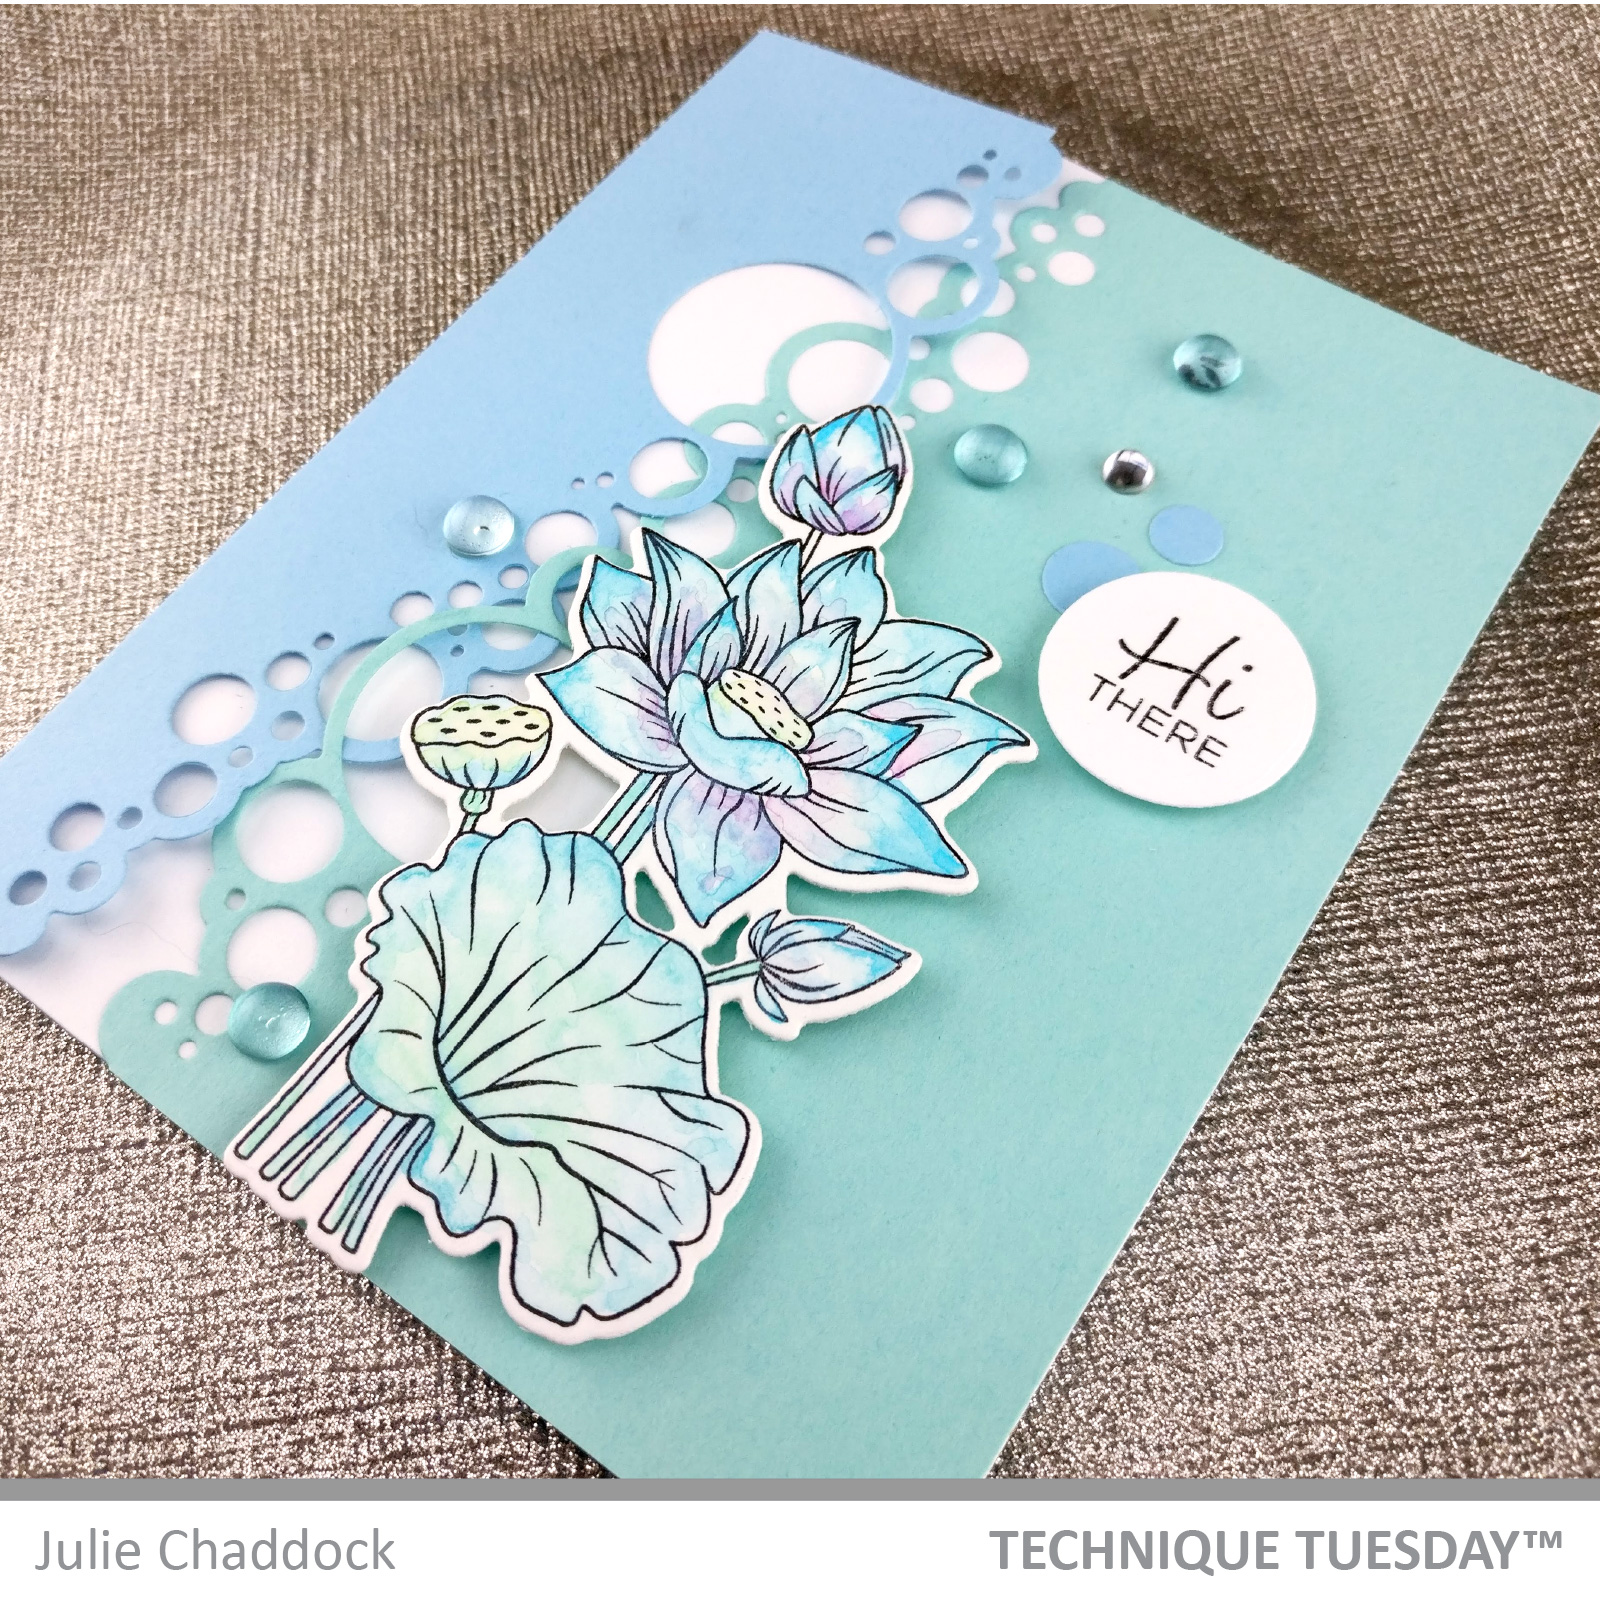 Die-Cut Flap Fold Card: How To Use Shaped Dies In Card Making